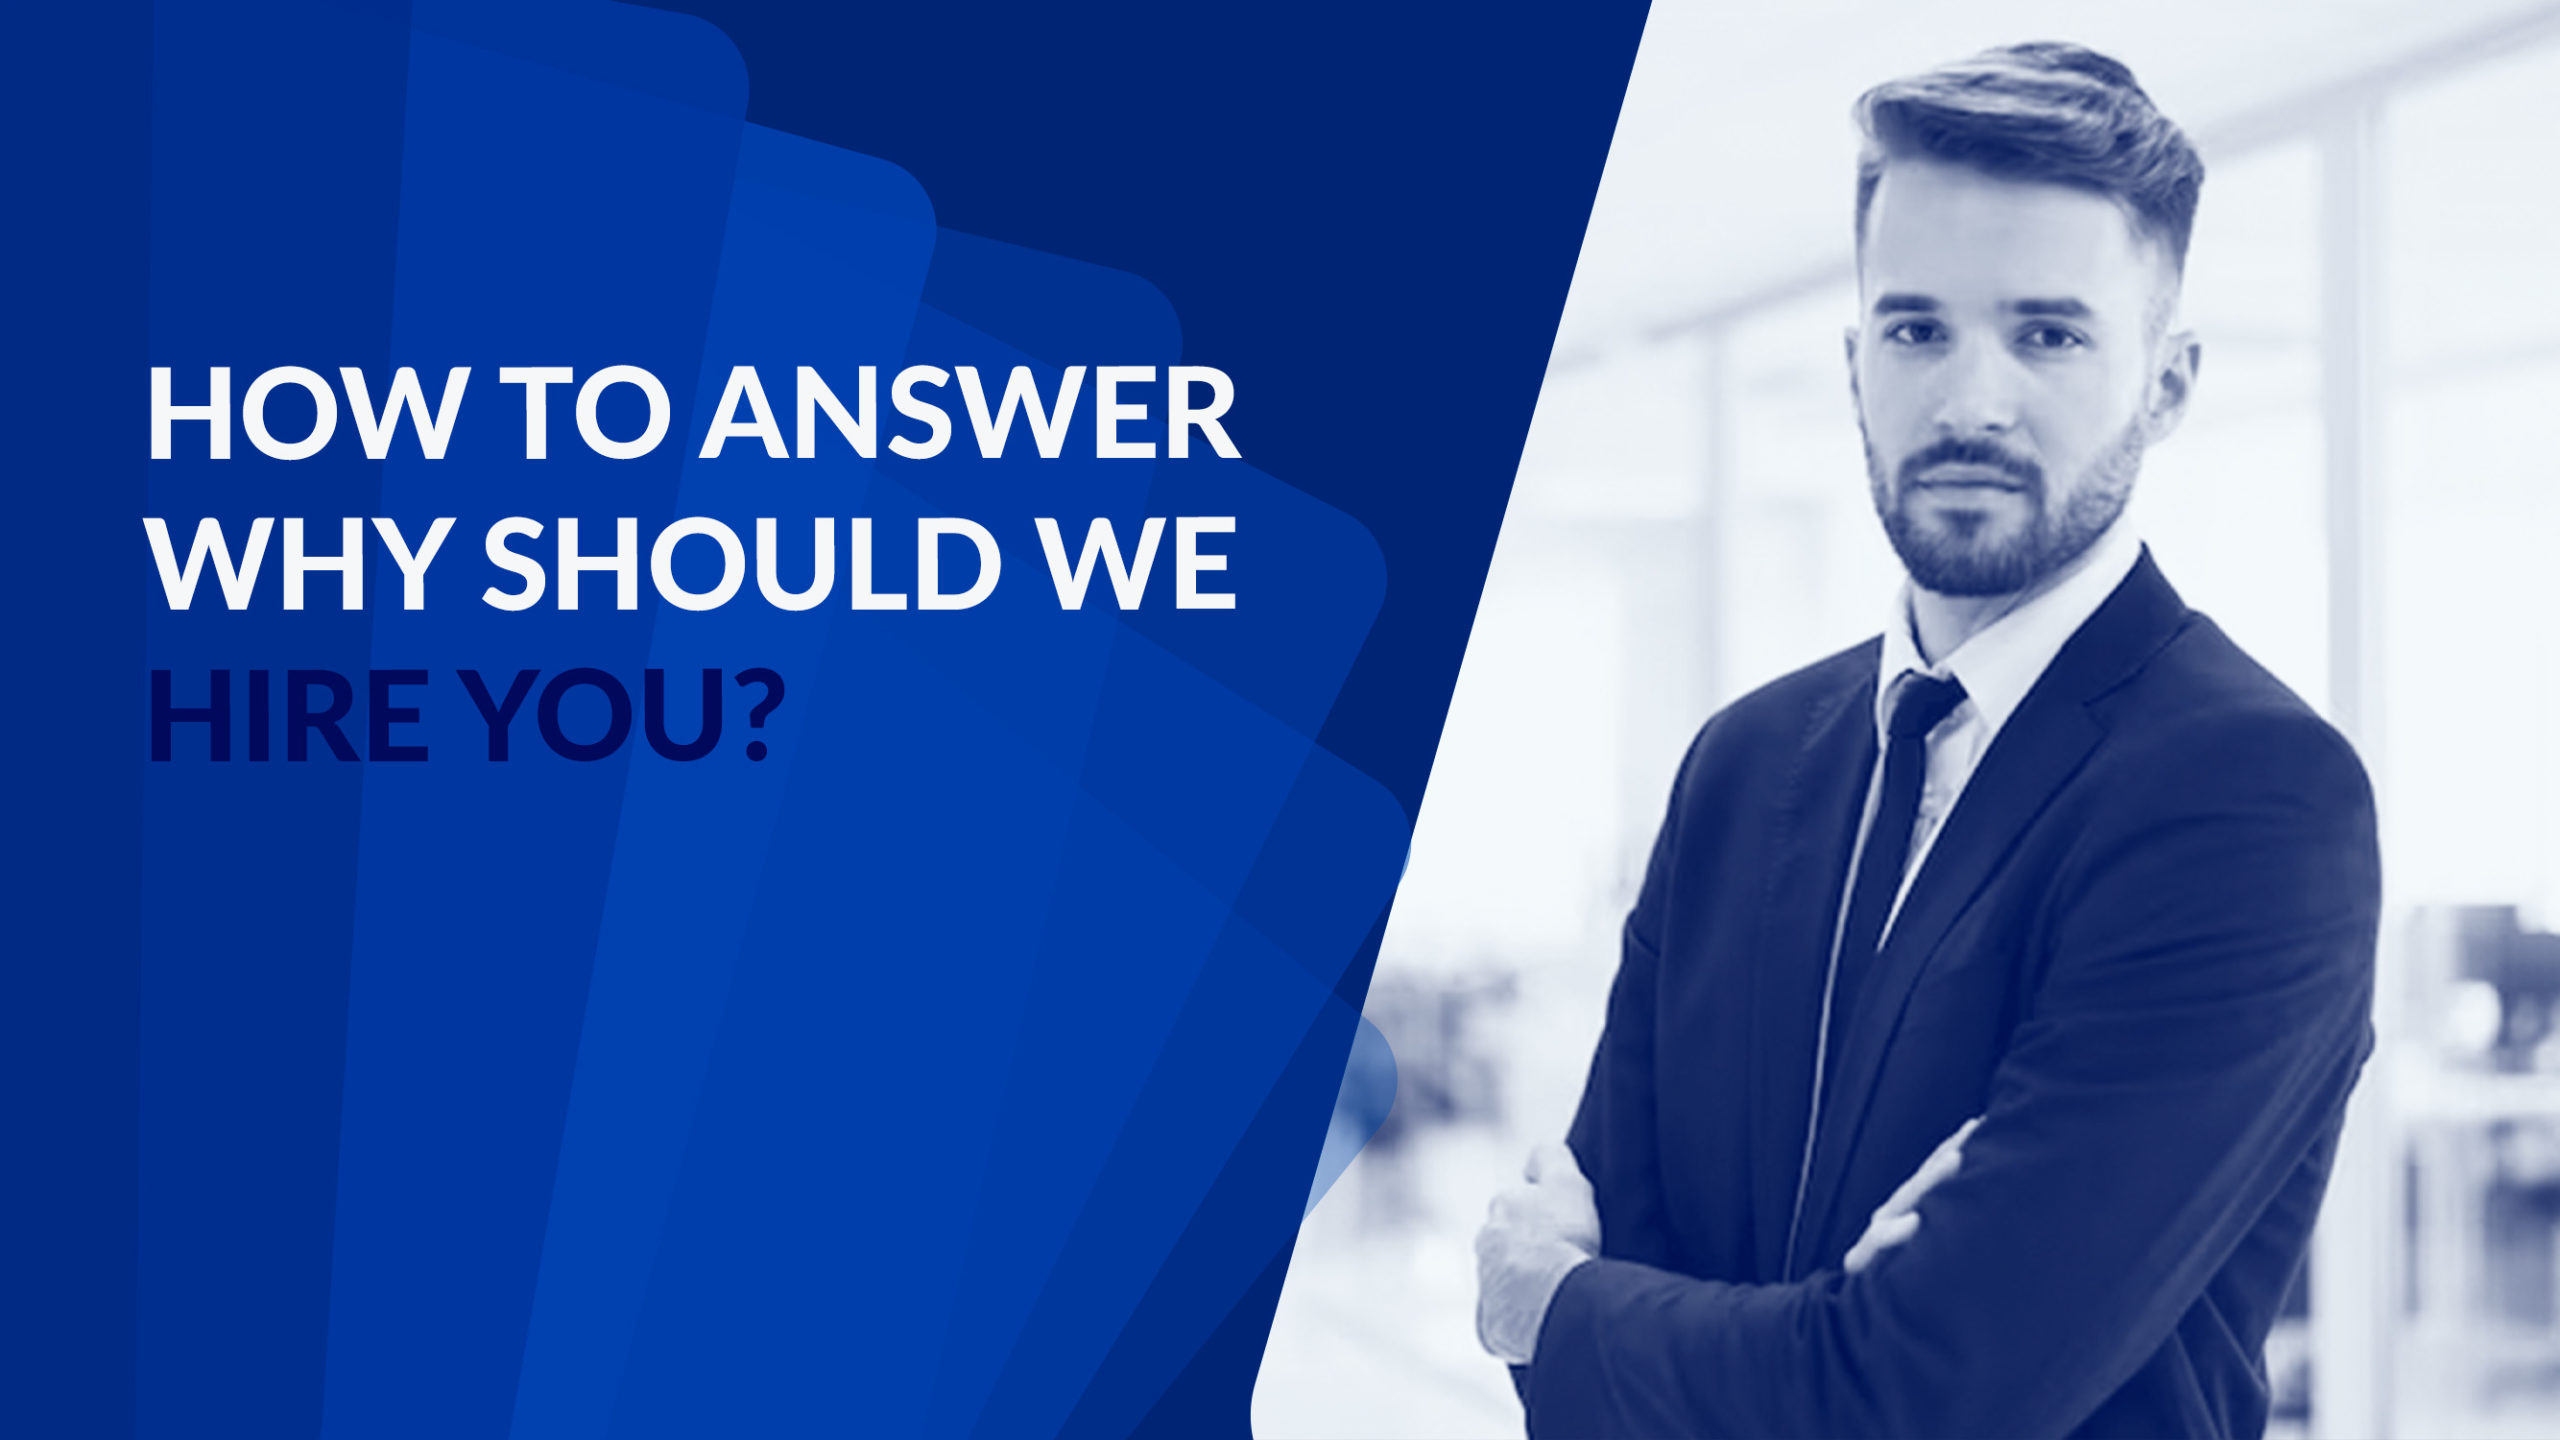 How to Answer Why Should We Hire You?